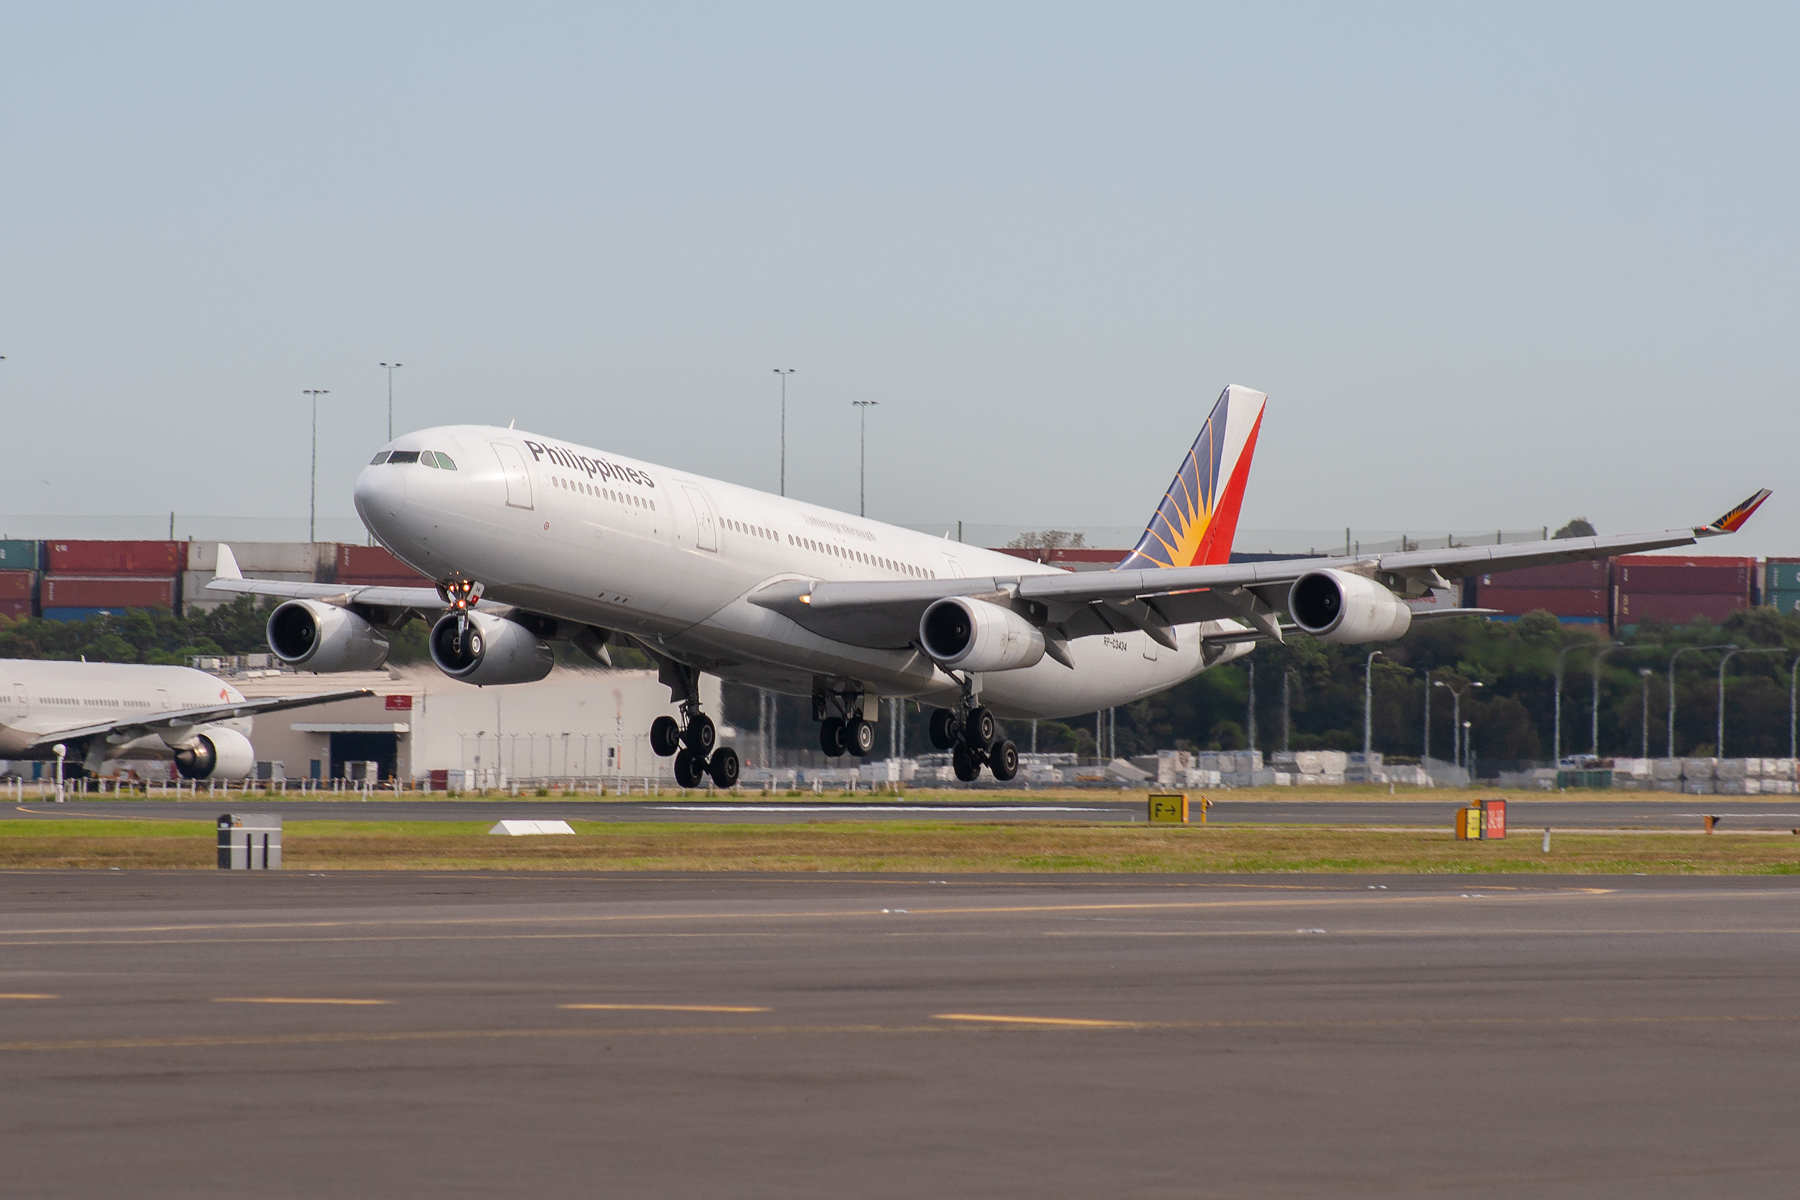 Philippine Airlines Airbus A340-300 RP-C3434 at Kingsford Smith